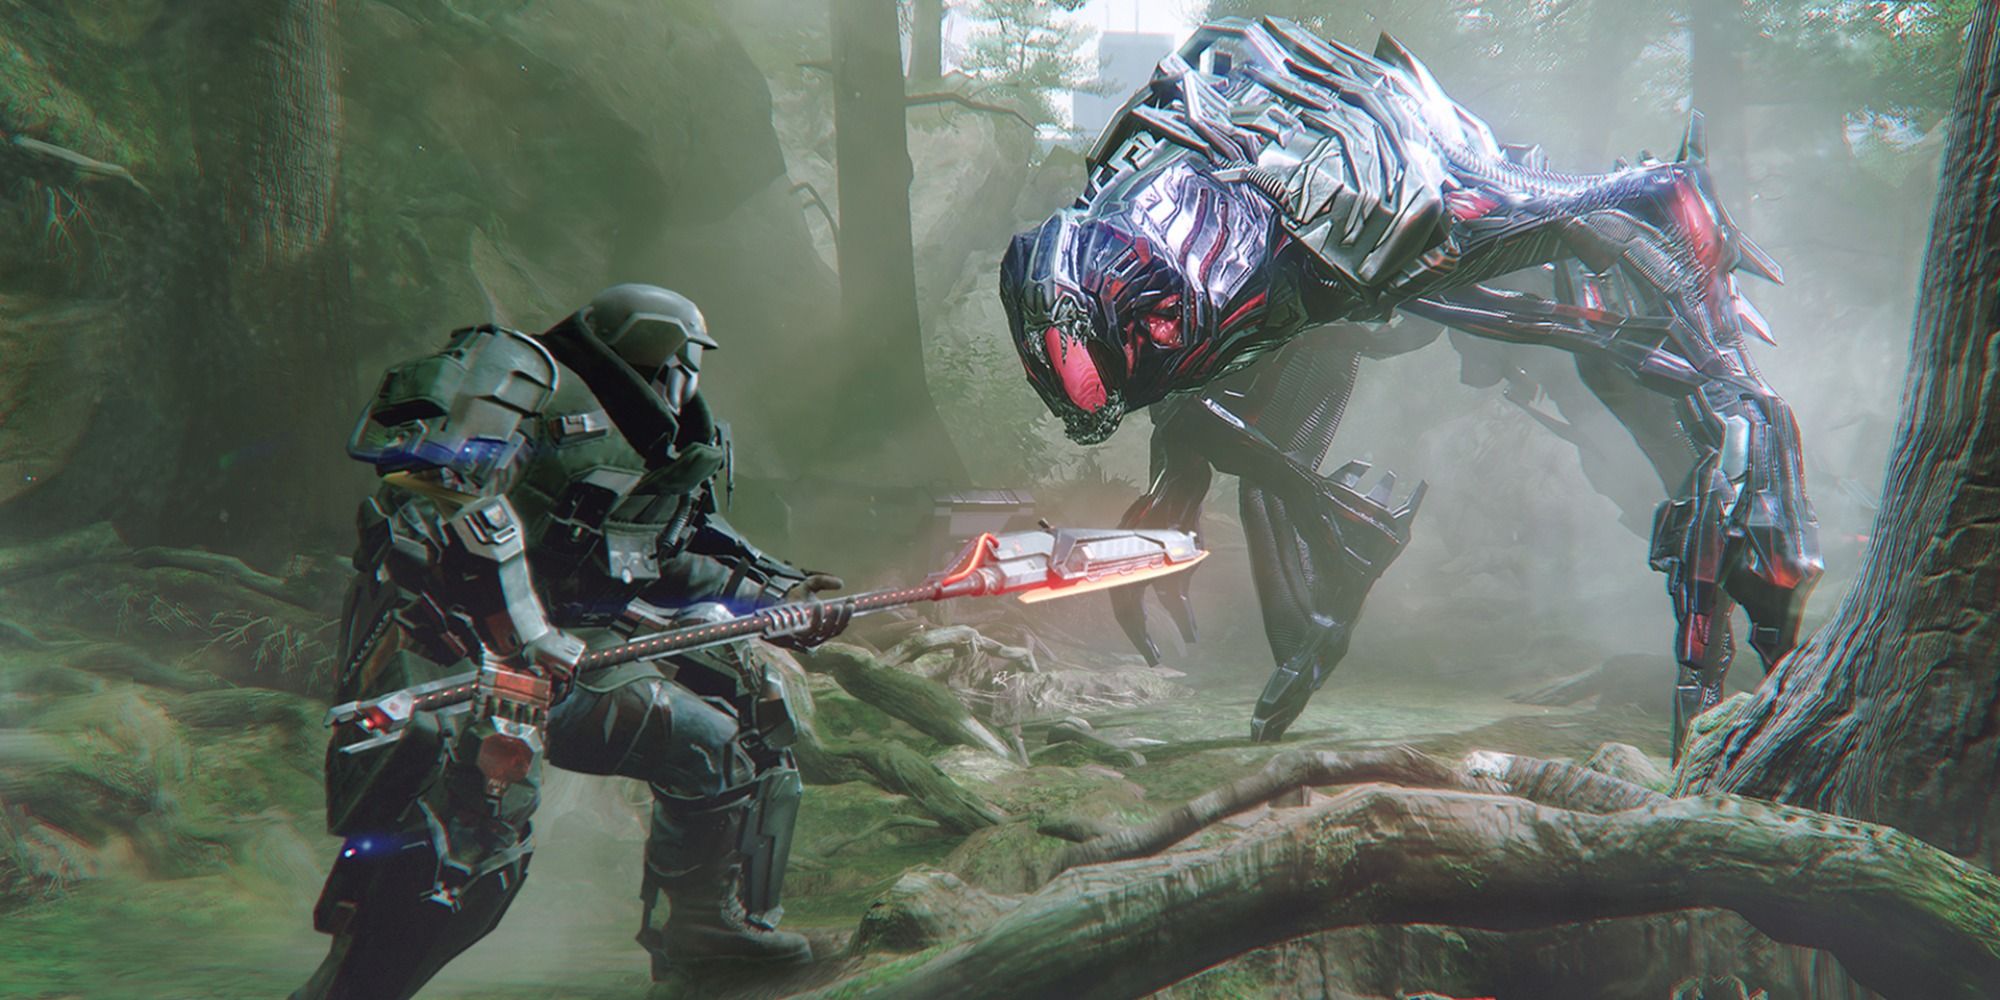 player's character fighting a boss in a forest environment using the spear in the surge 2